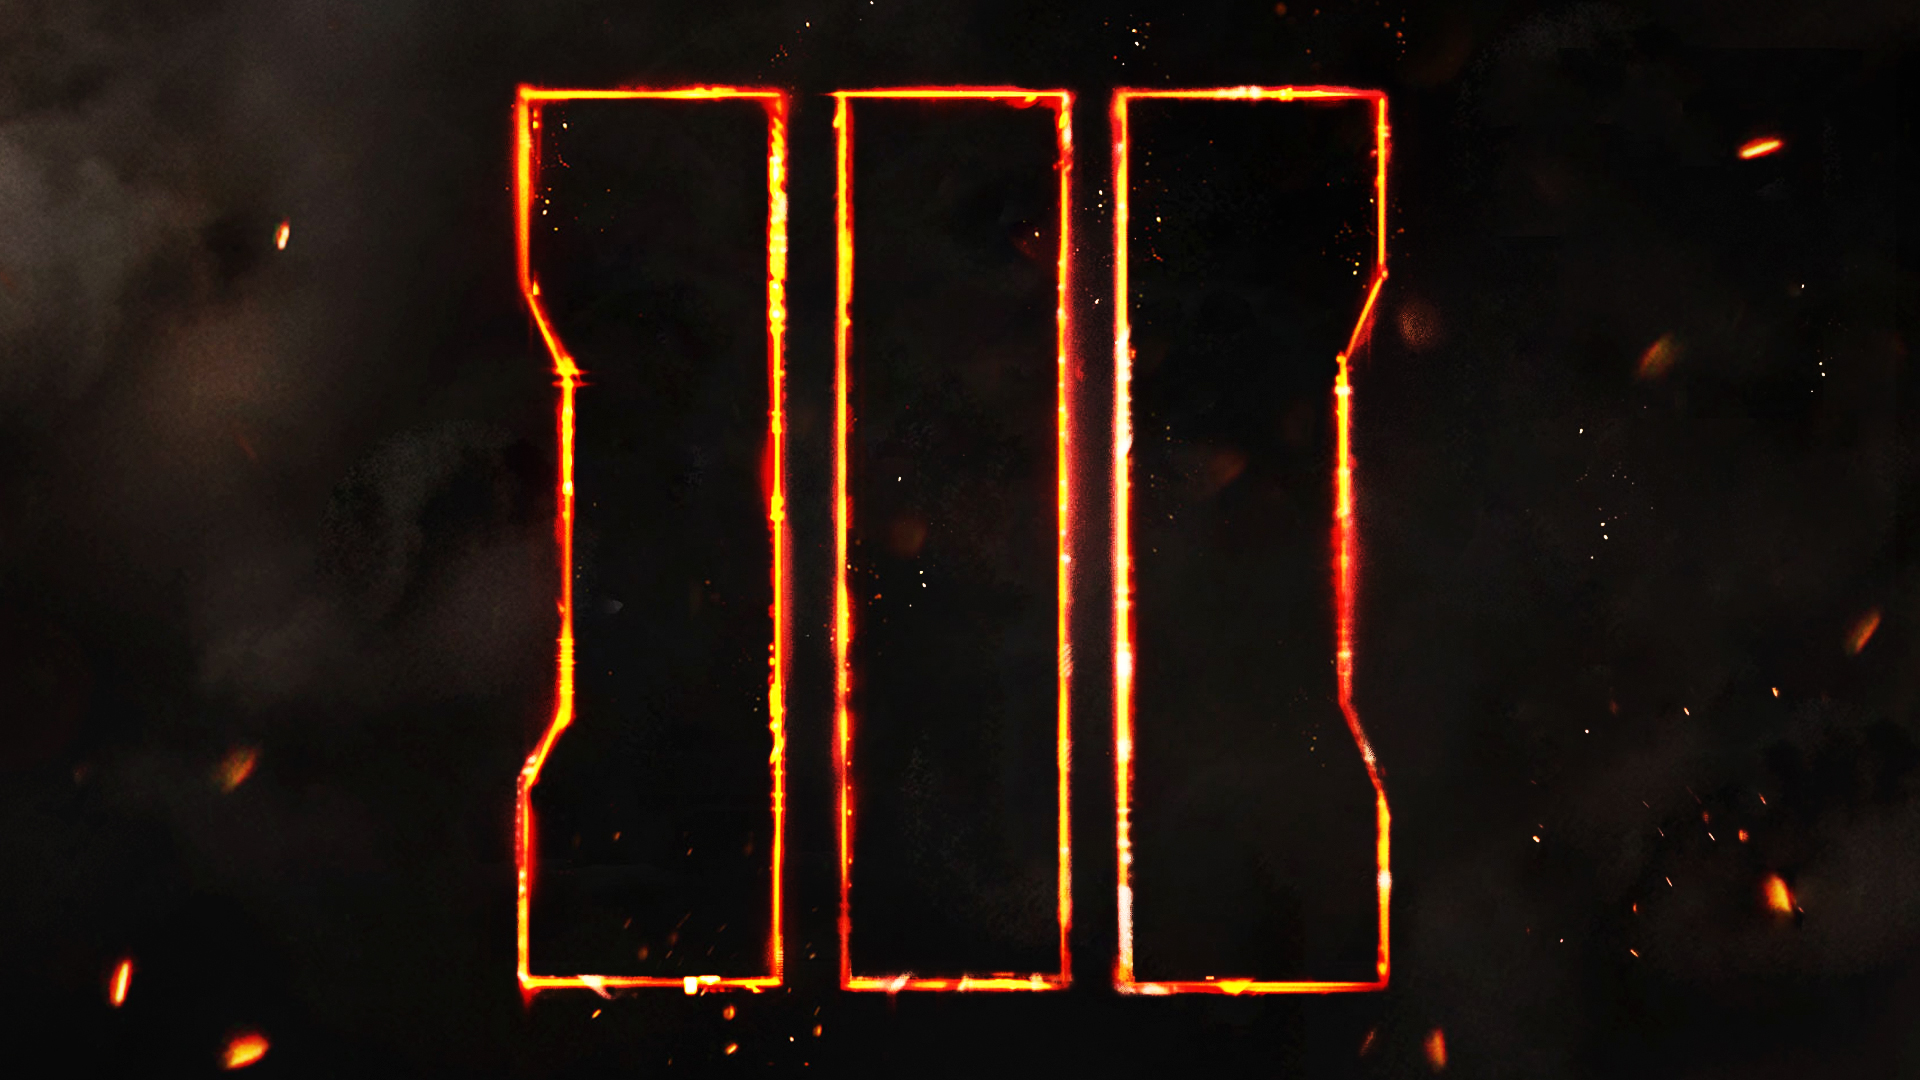 Black Ops 3 Wallpapers BO3   Download   Unofficial Call of Duty 1920x1080